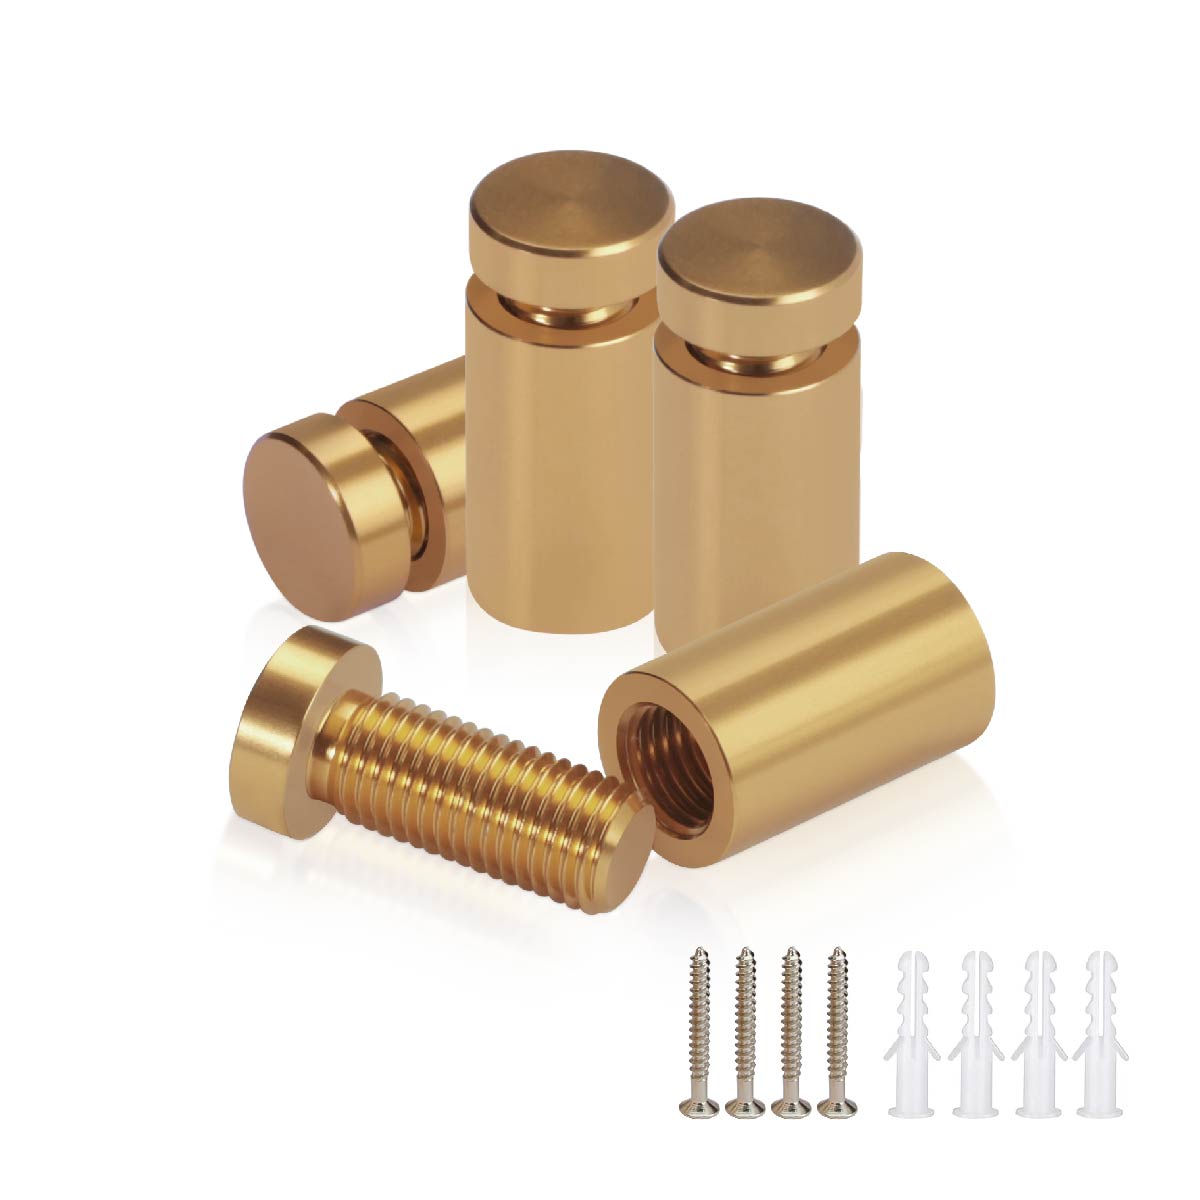 (Set of 4) 1/2'' Diameter X 3/4'' Barrel Length, Affordable Aluminum Standoffs, Champagne Anodized Finish Standoff and (4) 2208Z Screw and (4) LANC1 Anchor for concrete/drywall (For Inside/Outside) [Required Material Hole Size: 3/8'']